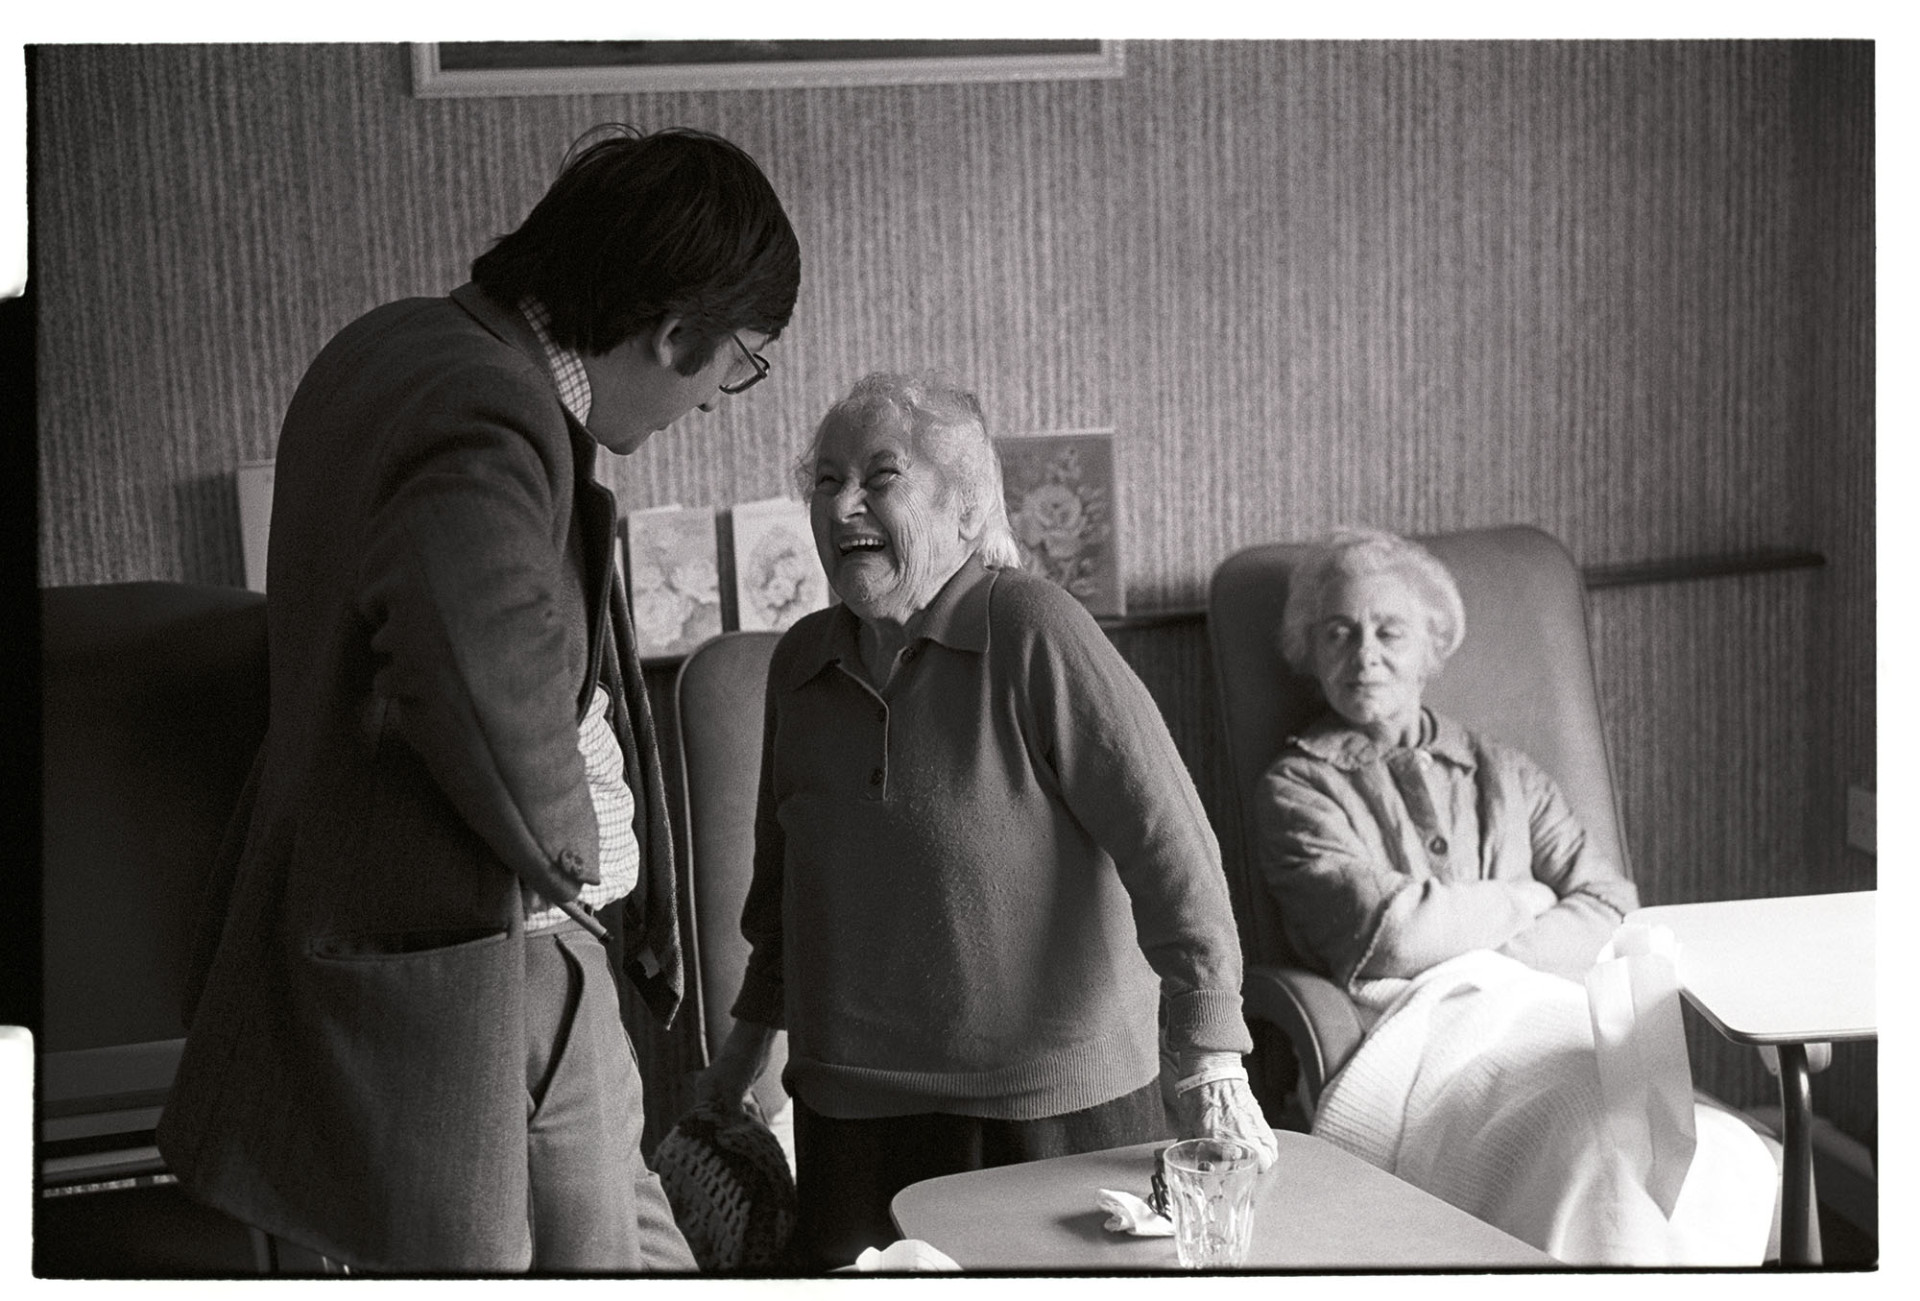 Doctor talking to elderly woman patient in day room of cottage hospital, laughing. 
[Dr Paul Bangay talking to a female patient in the day room of Torrington Cottage Hospital. The woman is laughing and another woman is sat in a chair in the background.]